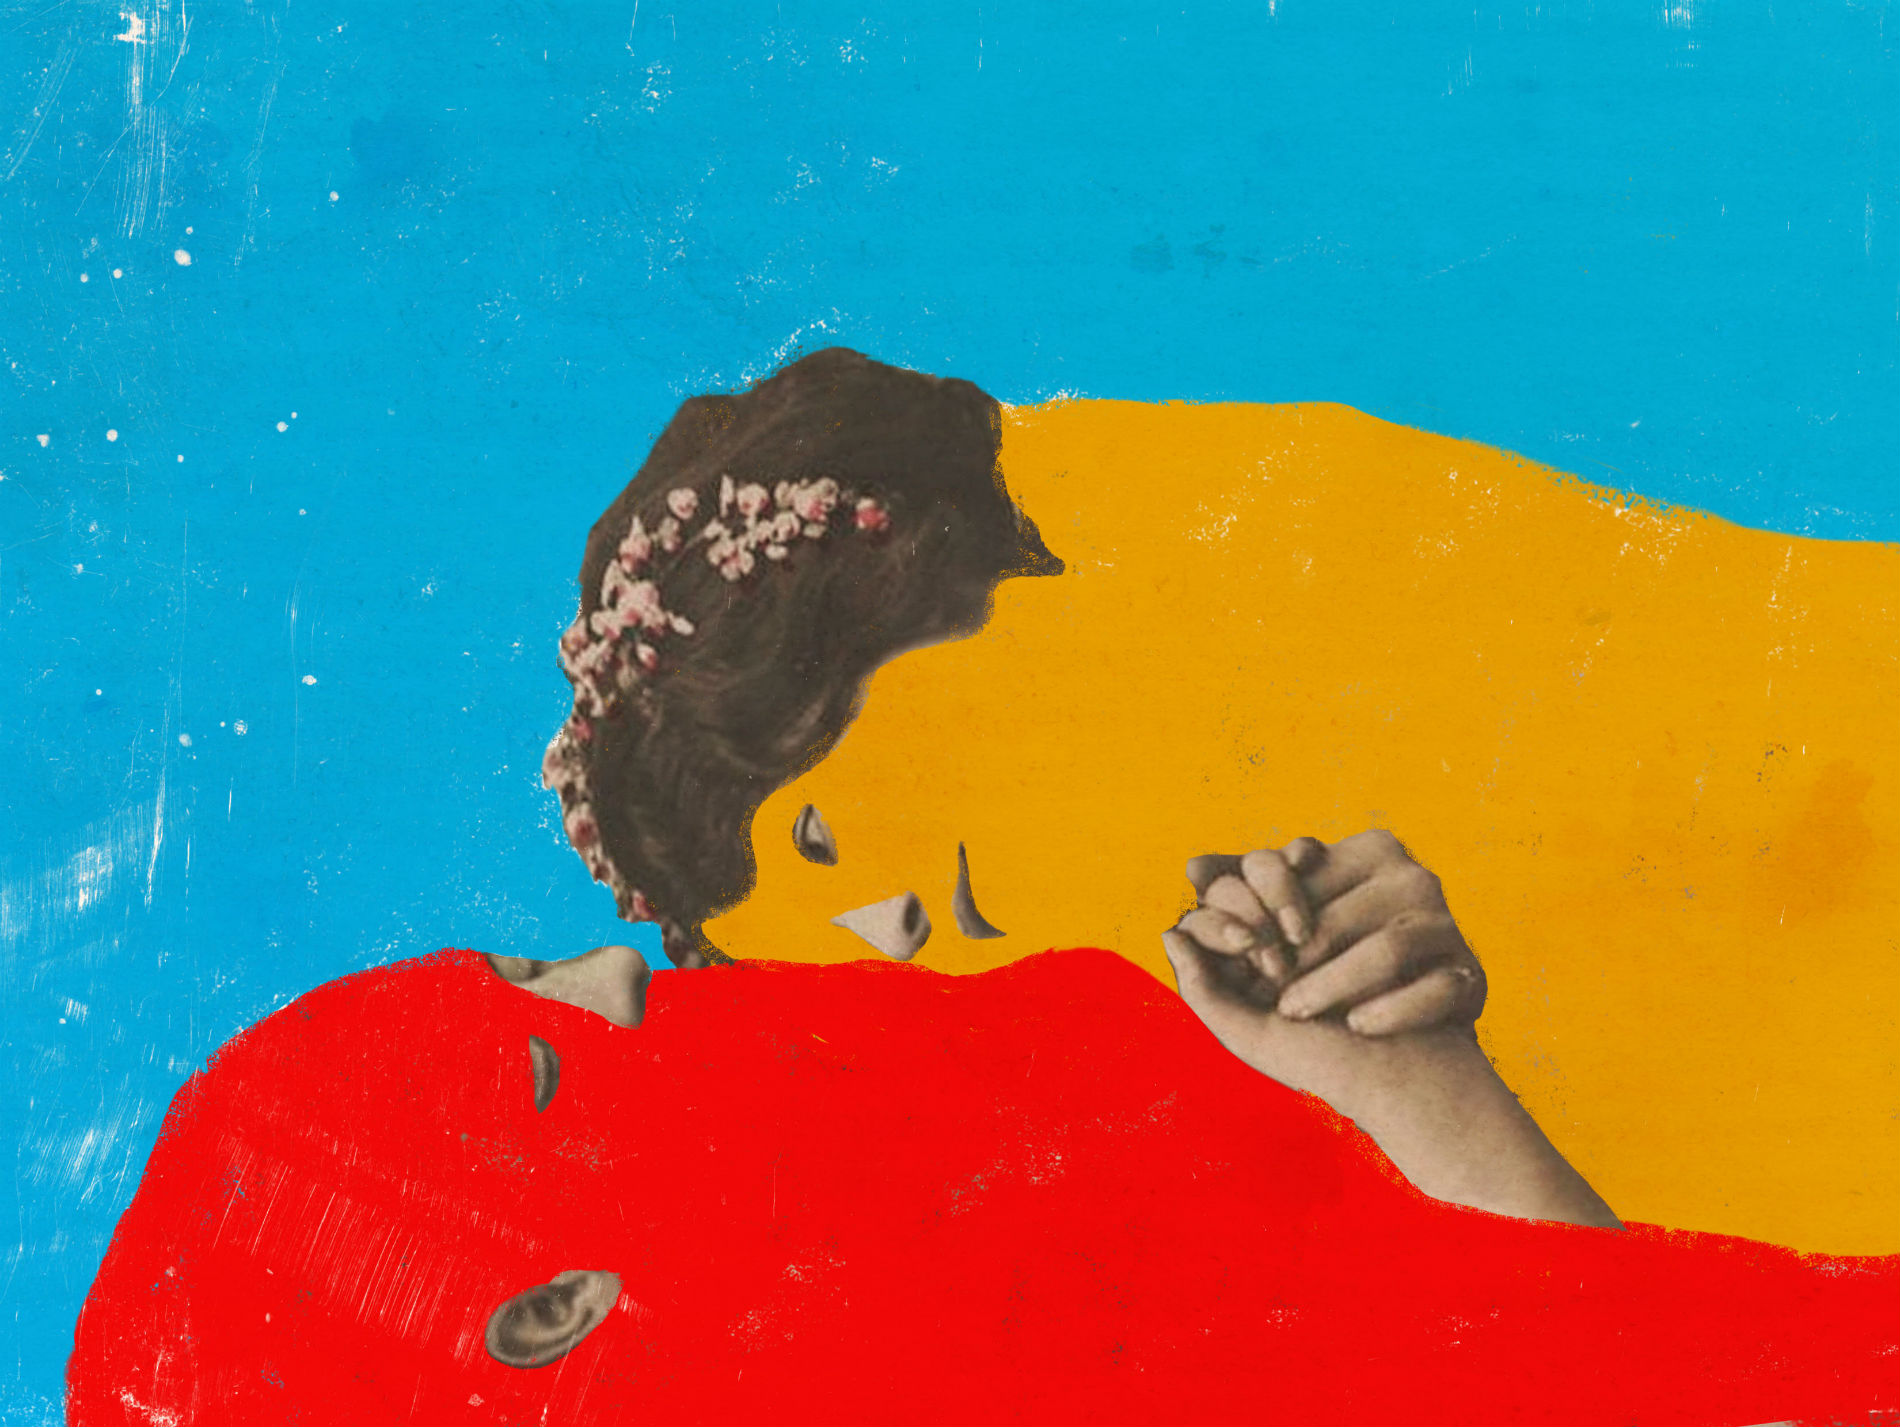 Raphaëlle Martin's Abstract Illustrations of People in Love | Scene360